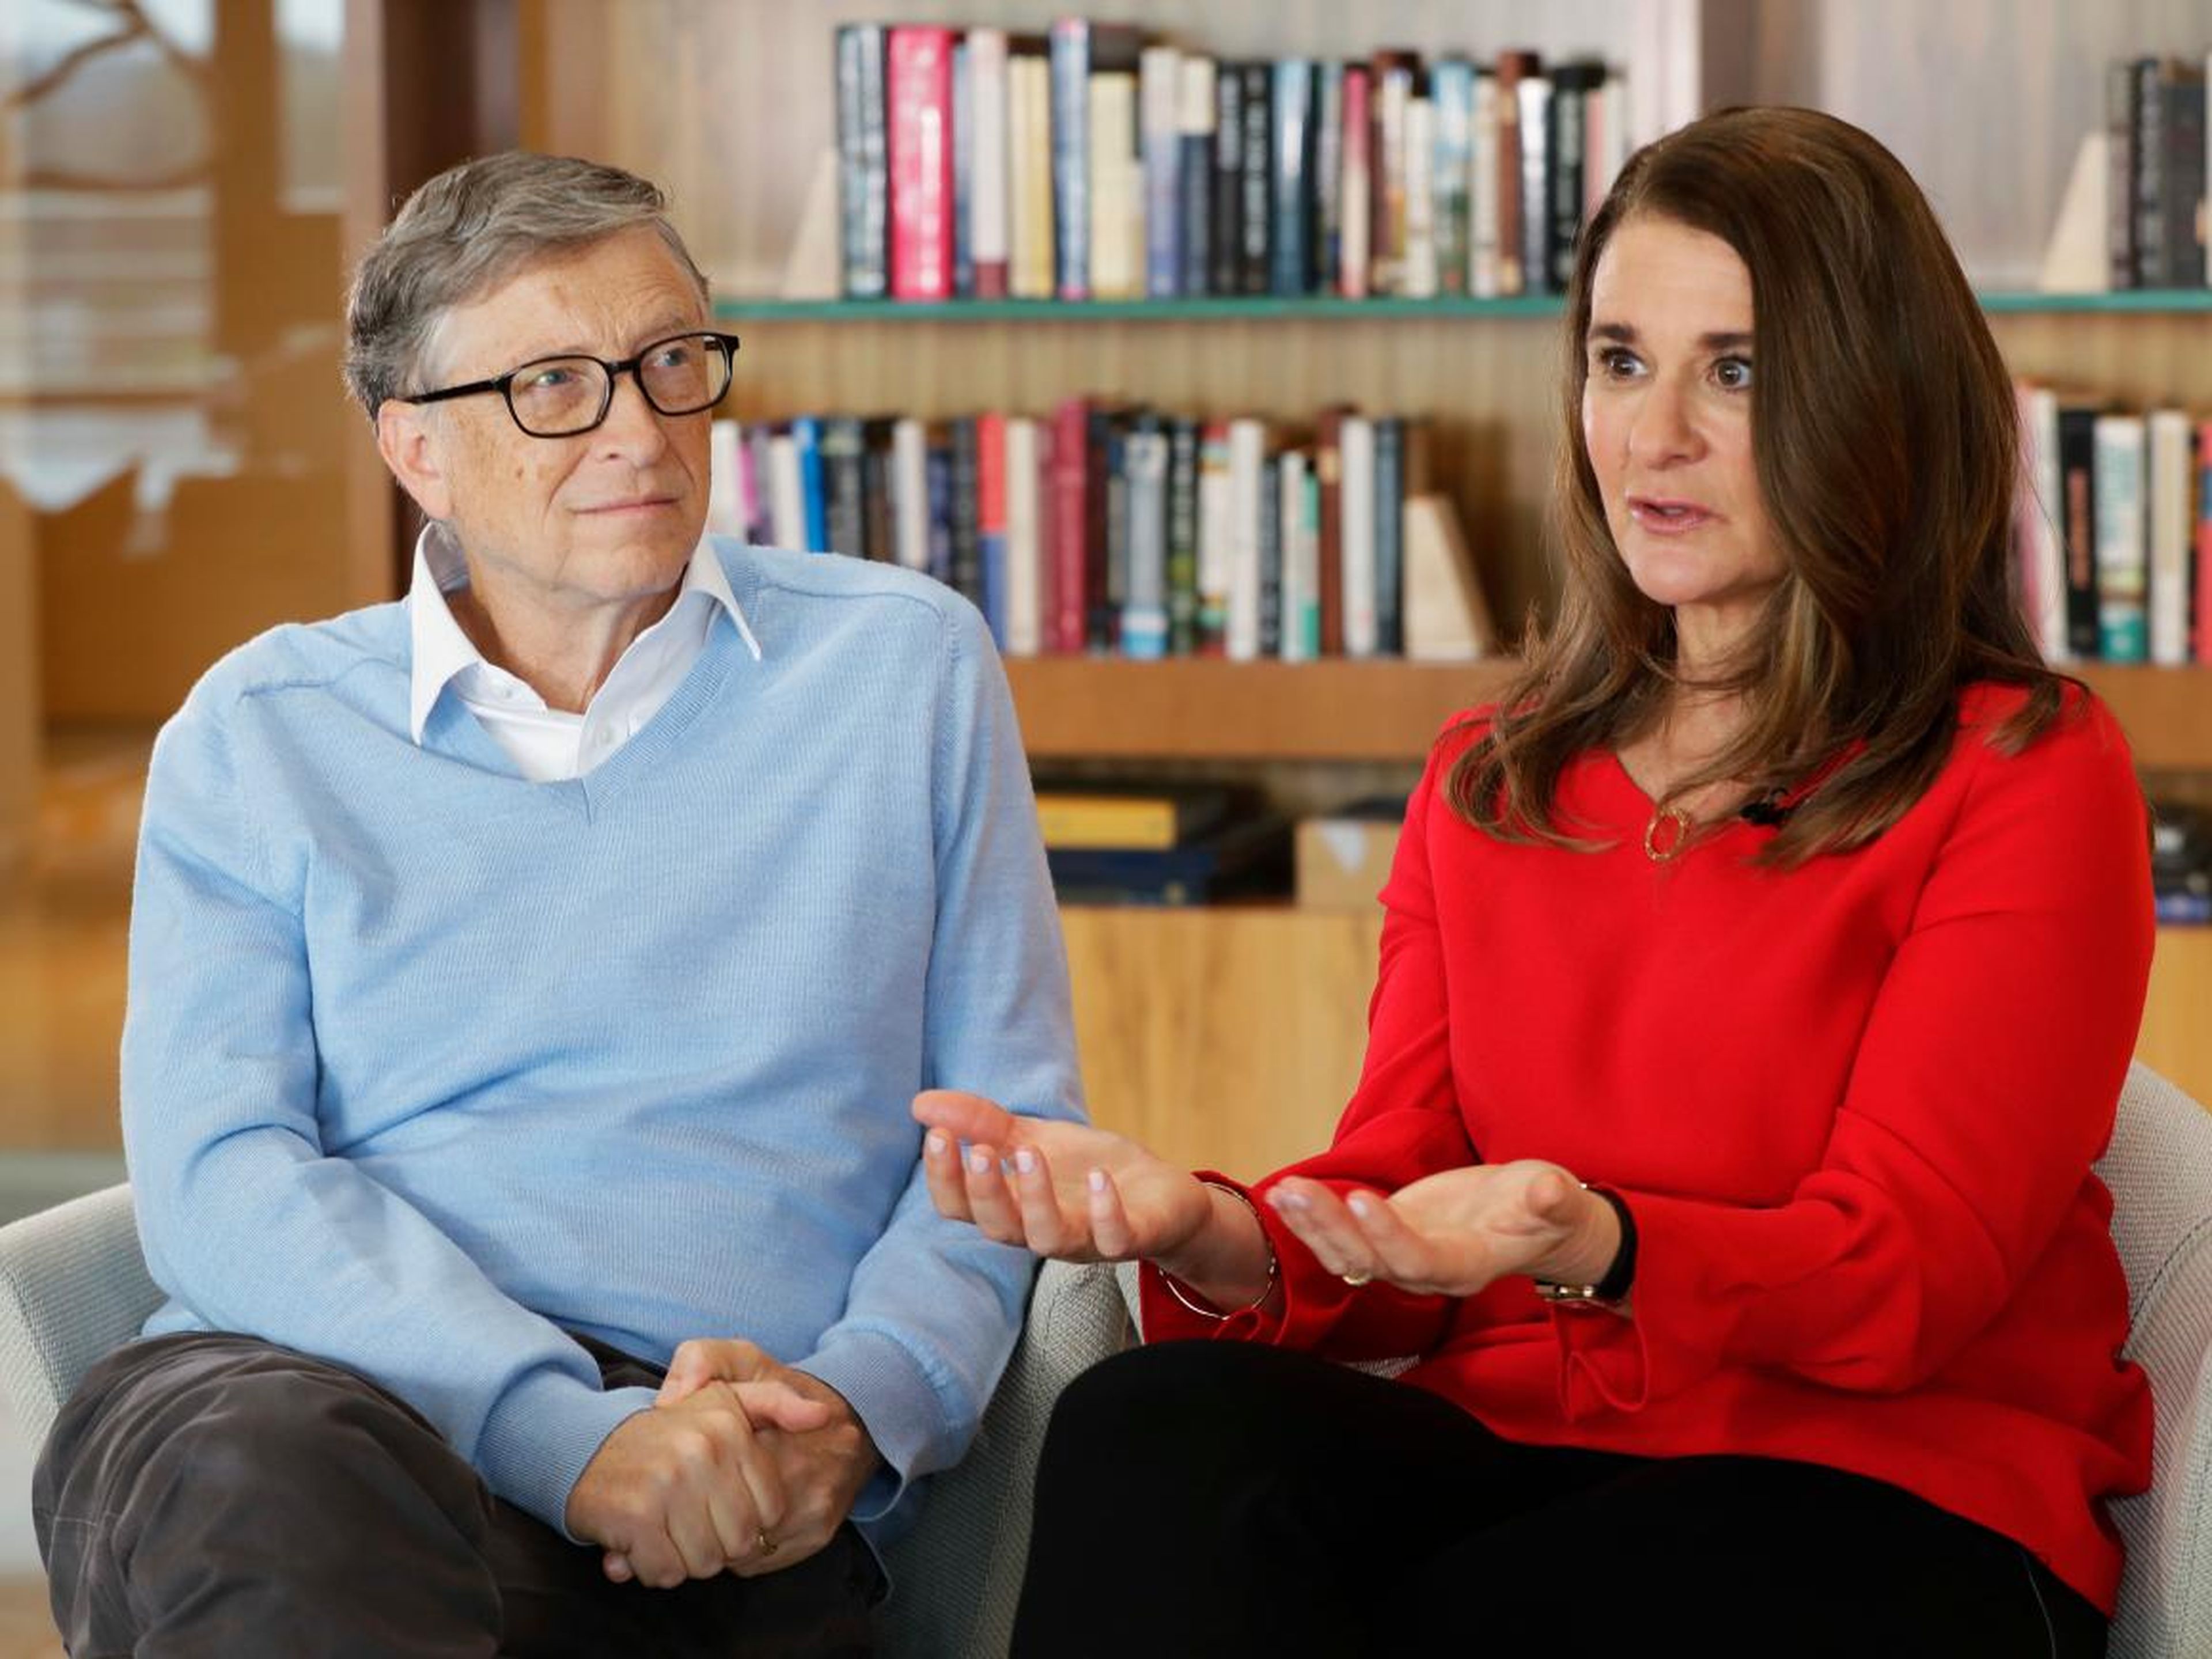 He teamed up with Bill and Melinda Gates in 2010 to form The Giving Pledge, an initiative that asks the world's wealthiest people to dedicate the majority of their wealth to philanthropy.